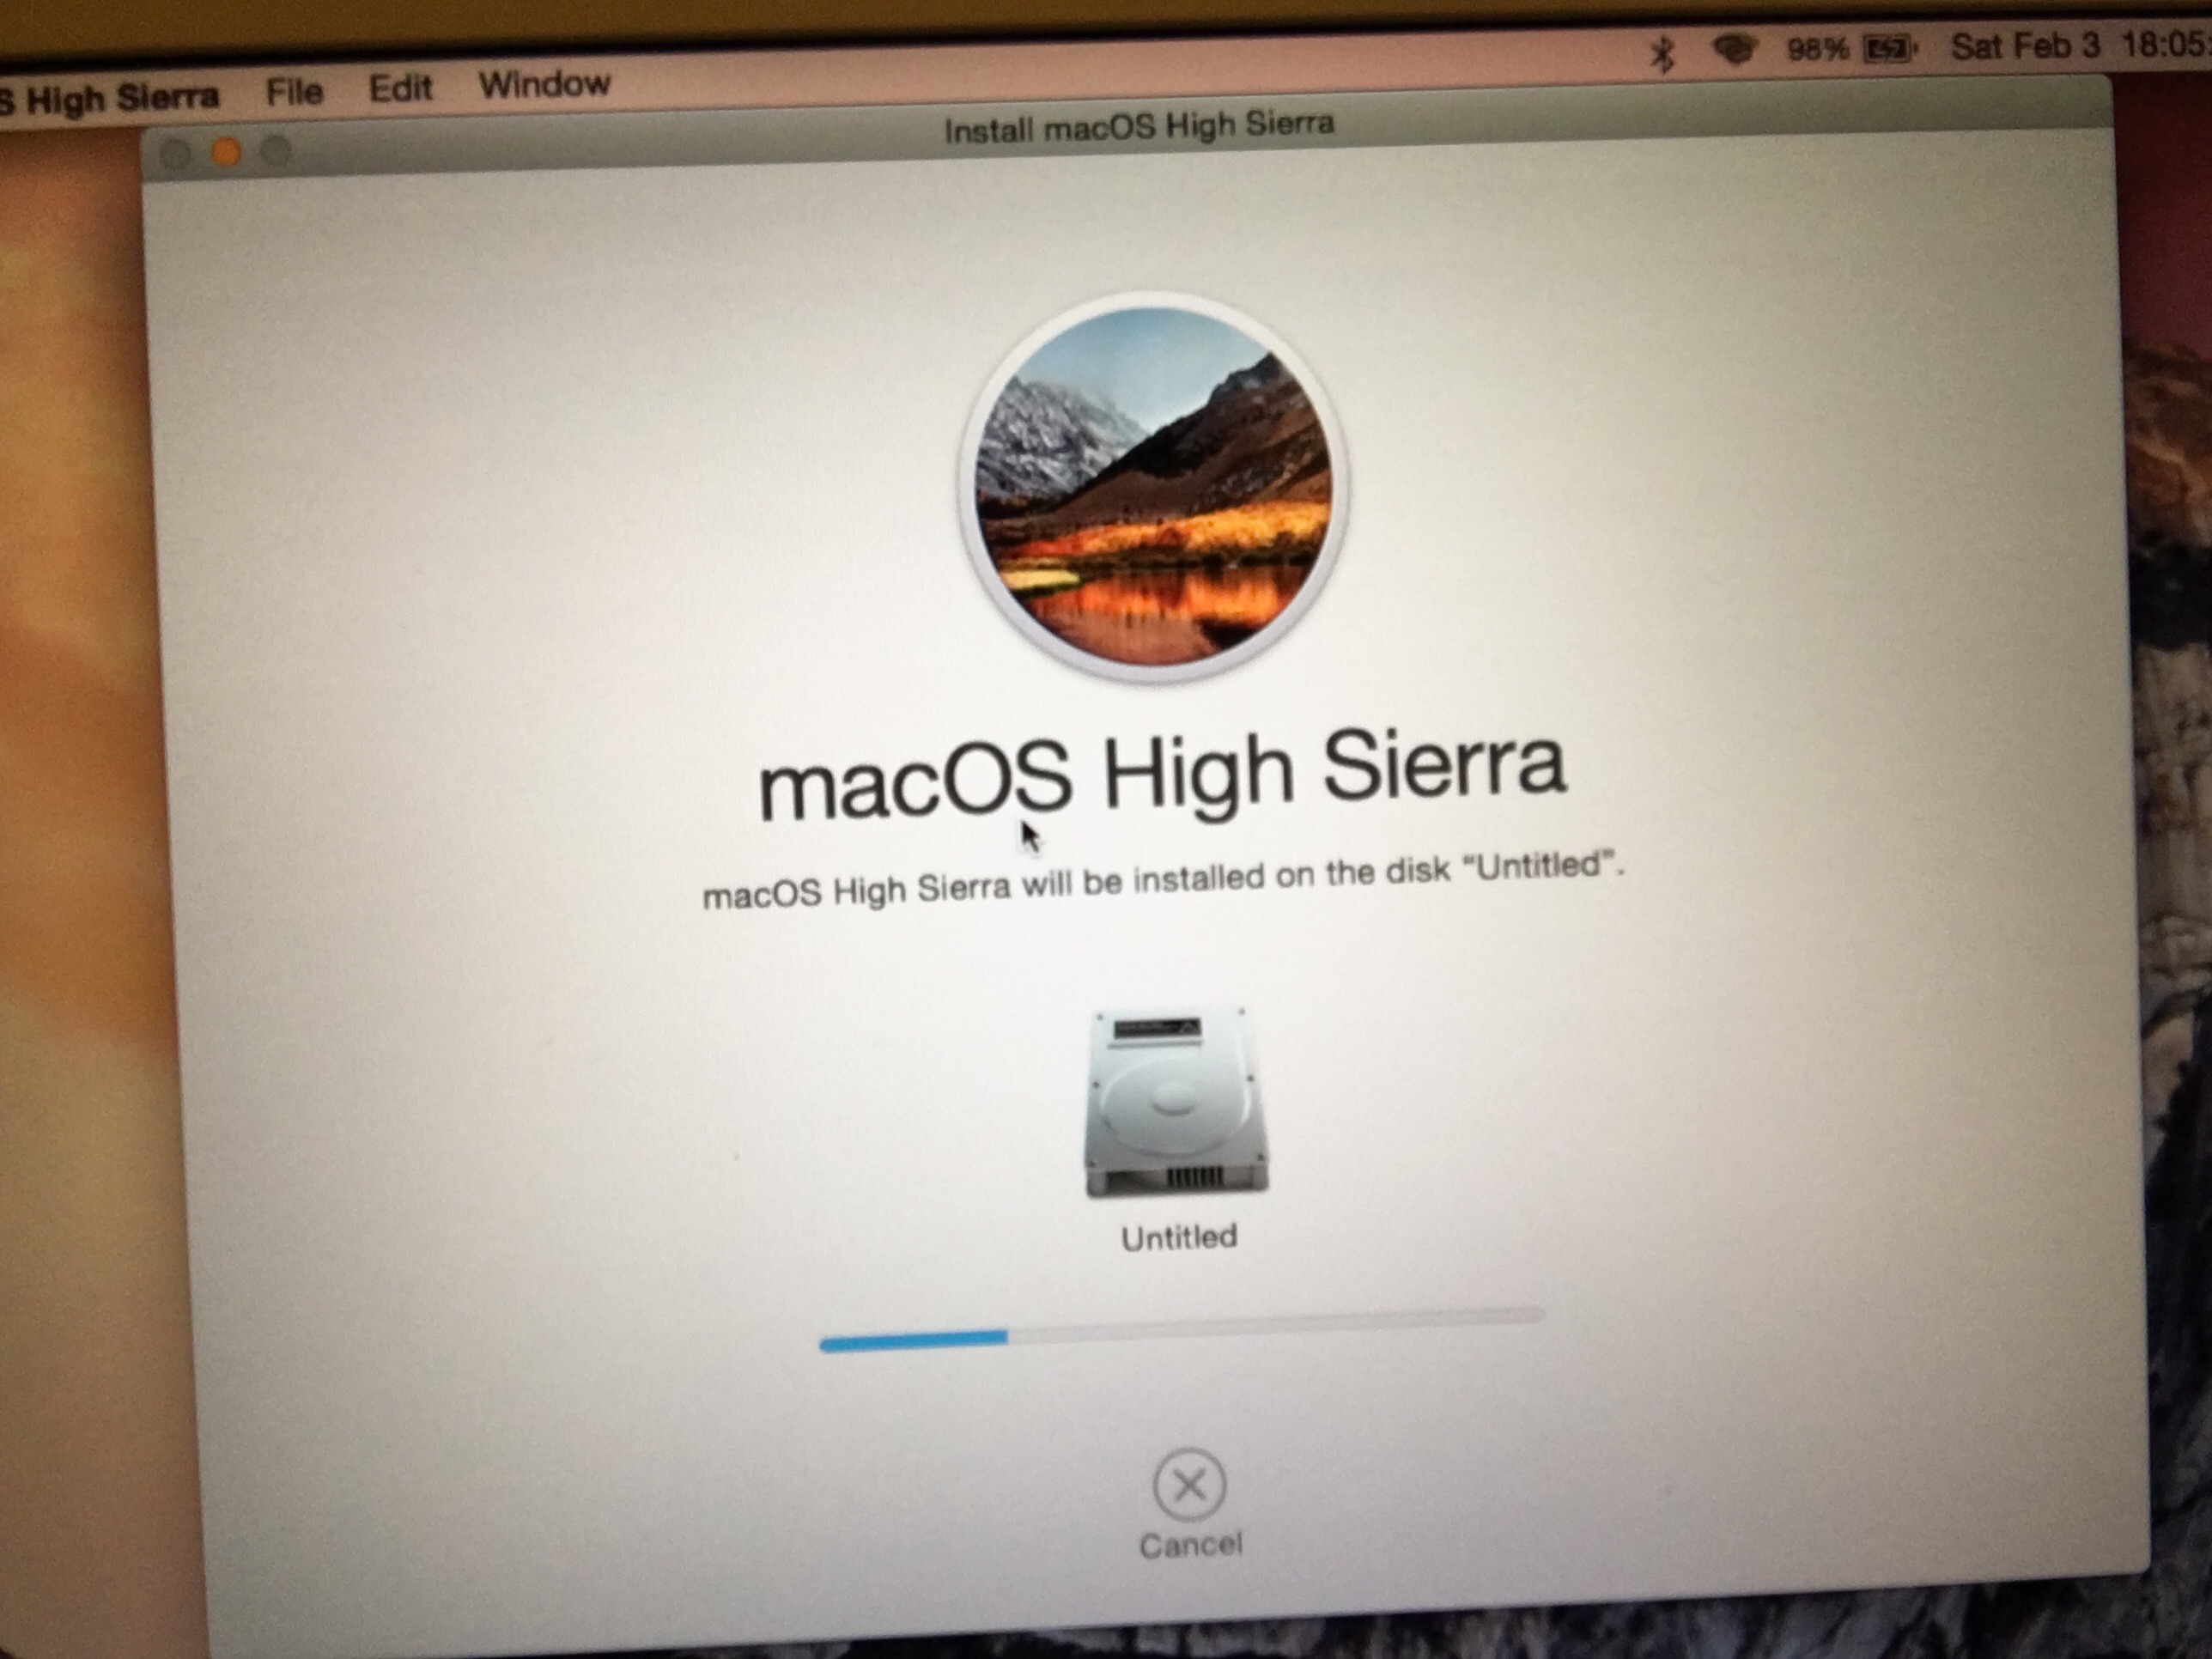 The recovery server could not be contacted high sierra installation